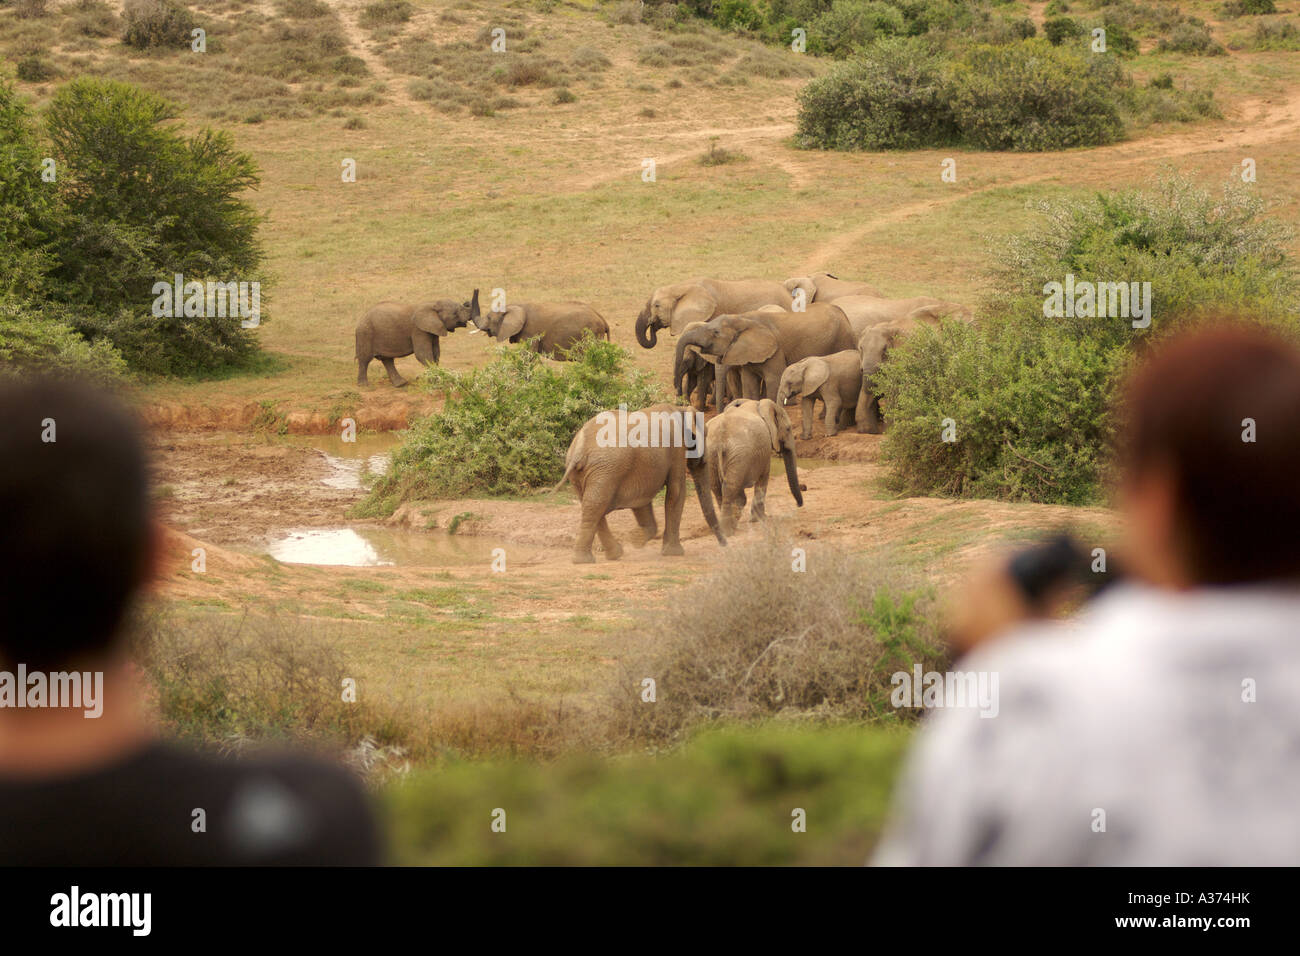 Tourists watching elephants at a watering hole in the Addo Elephant National Park in South Africa's Eastern Cape Province. Stock Photo